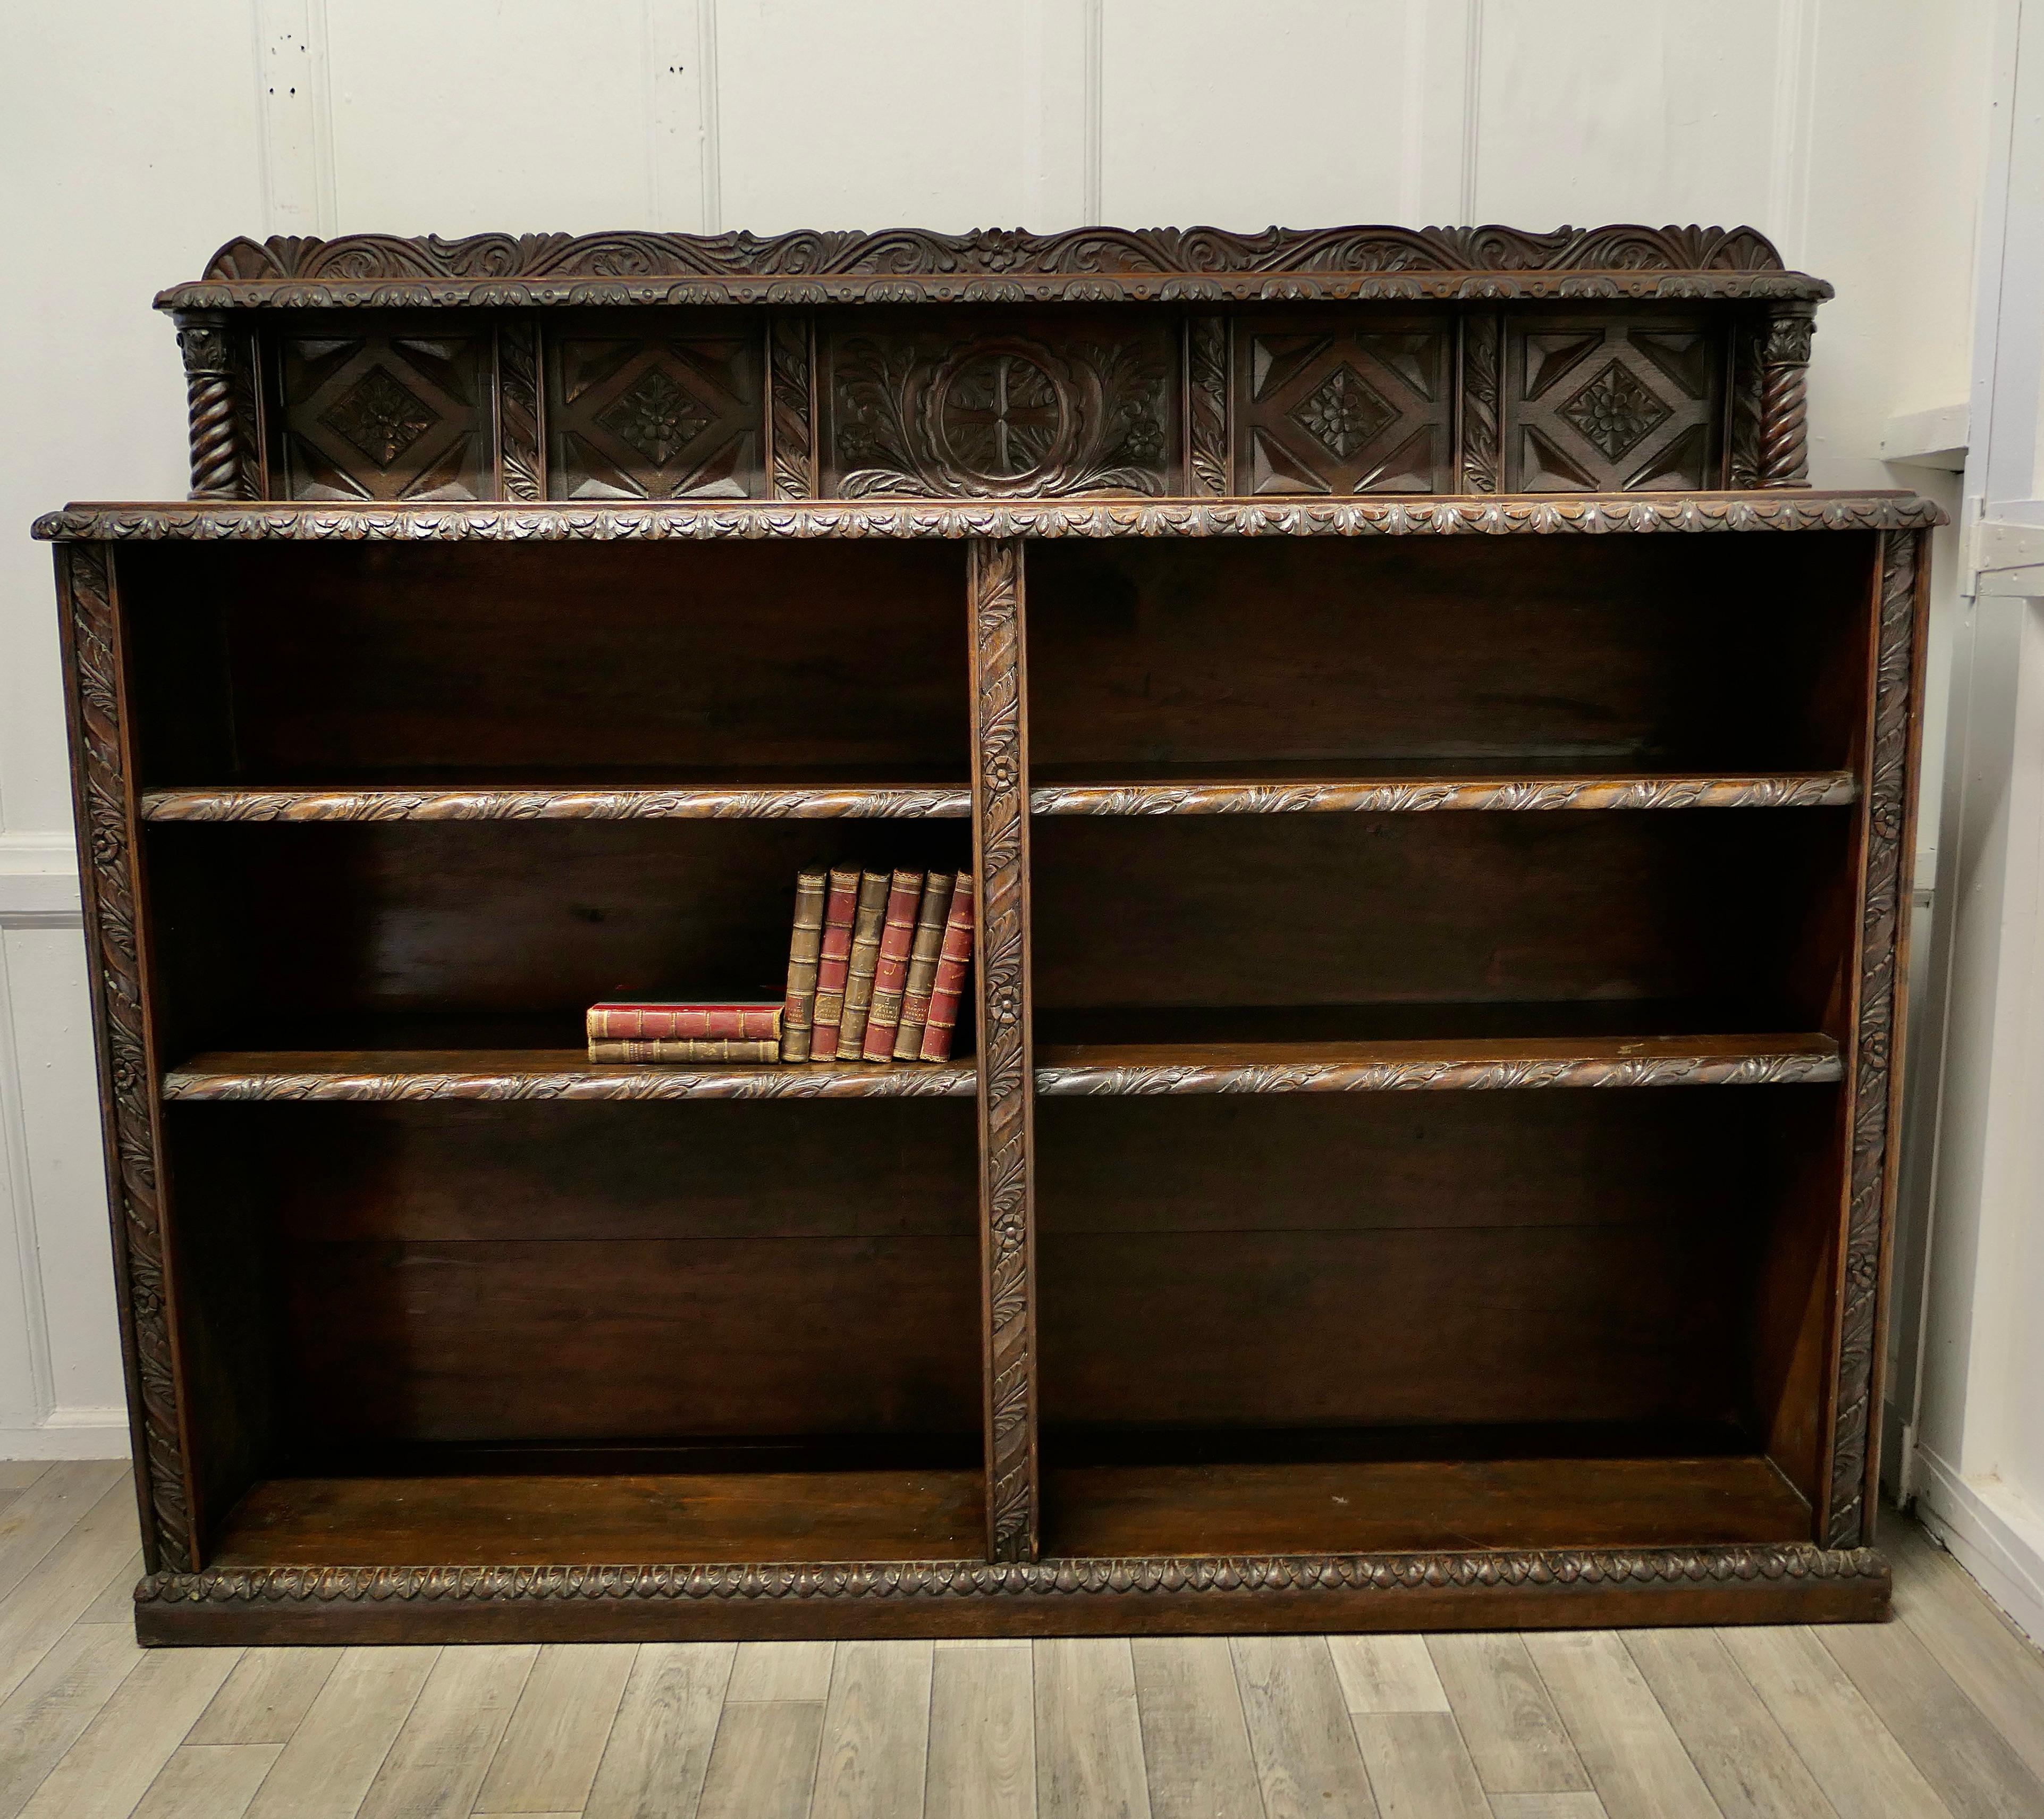 Long carved Arts and Crafts Gothic oak open book case

The book case is in carved oak, it is double length with a small carved shelved galleried back.
Both sides of the bookcase have 3 storage sections, the top shelf is 9” high, the next is 10”